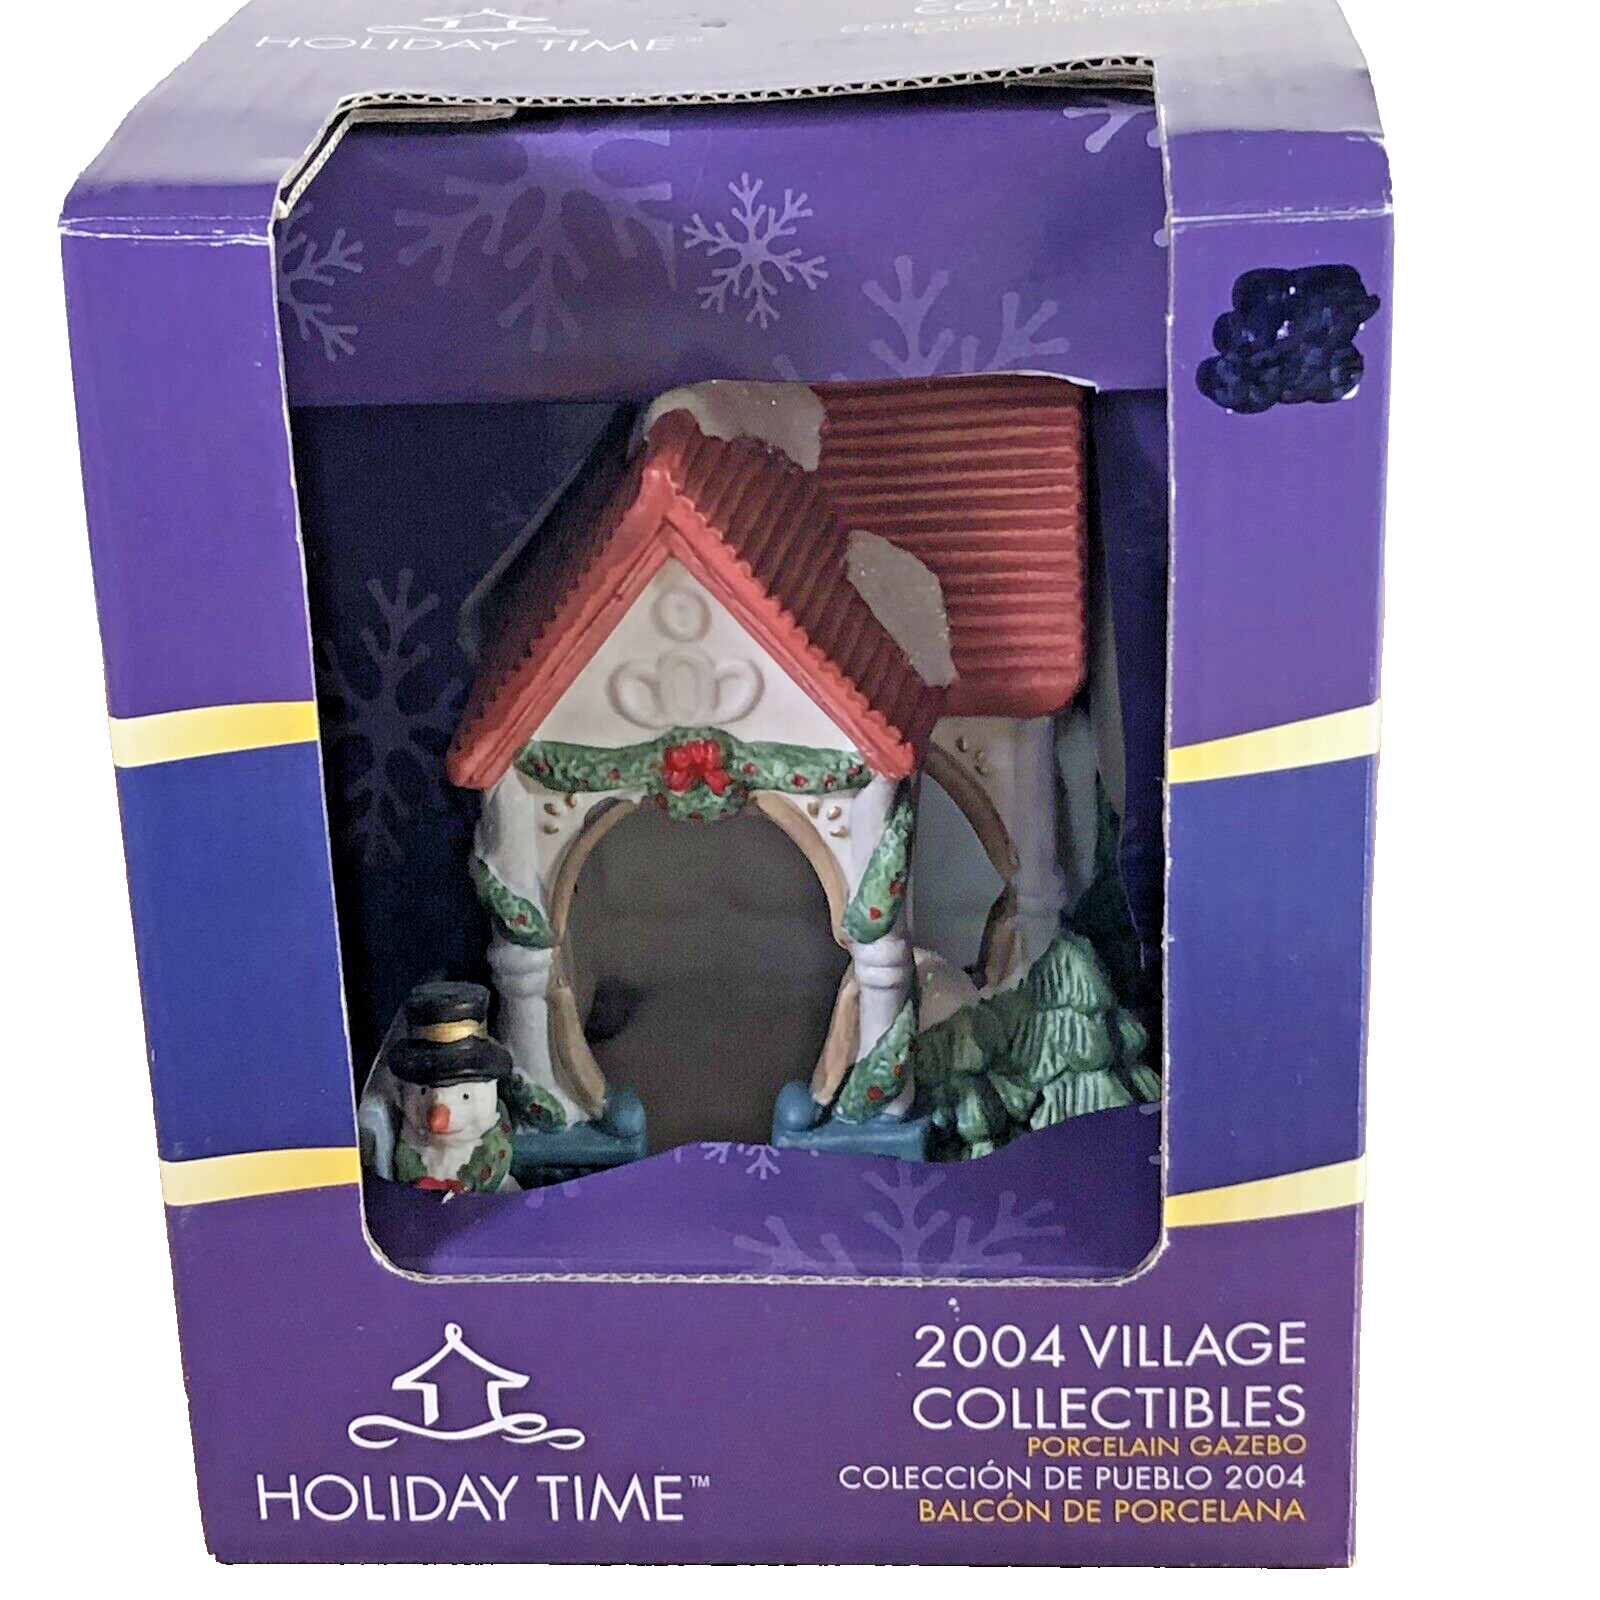 Holiday Time 2004 Porcelain Gazebo House Christmas village accessory New in Box